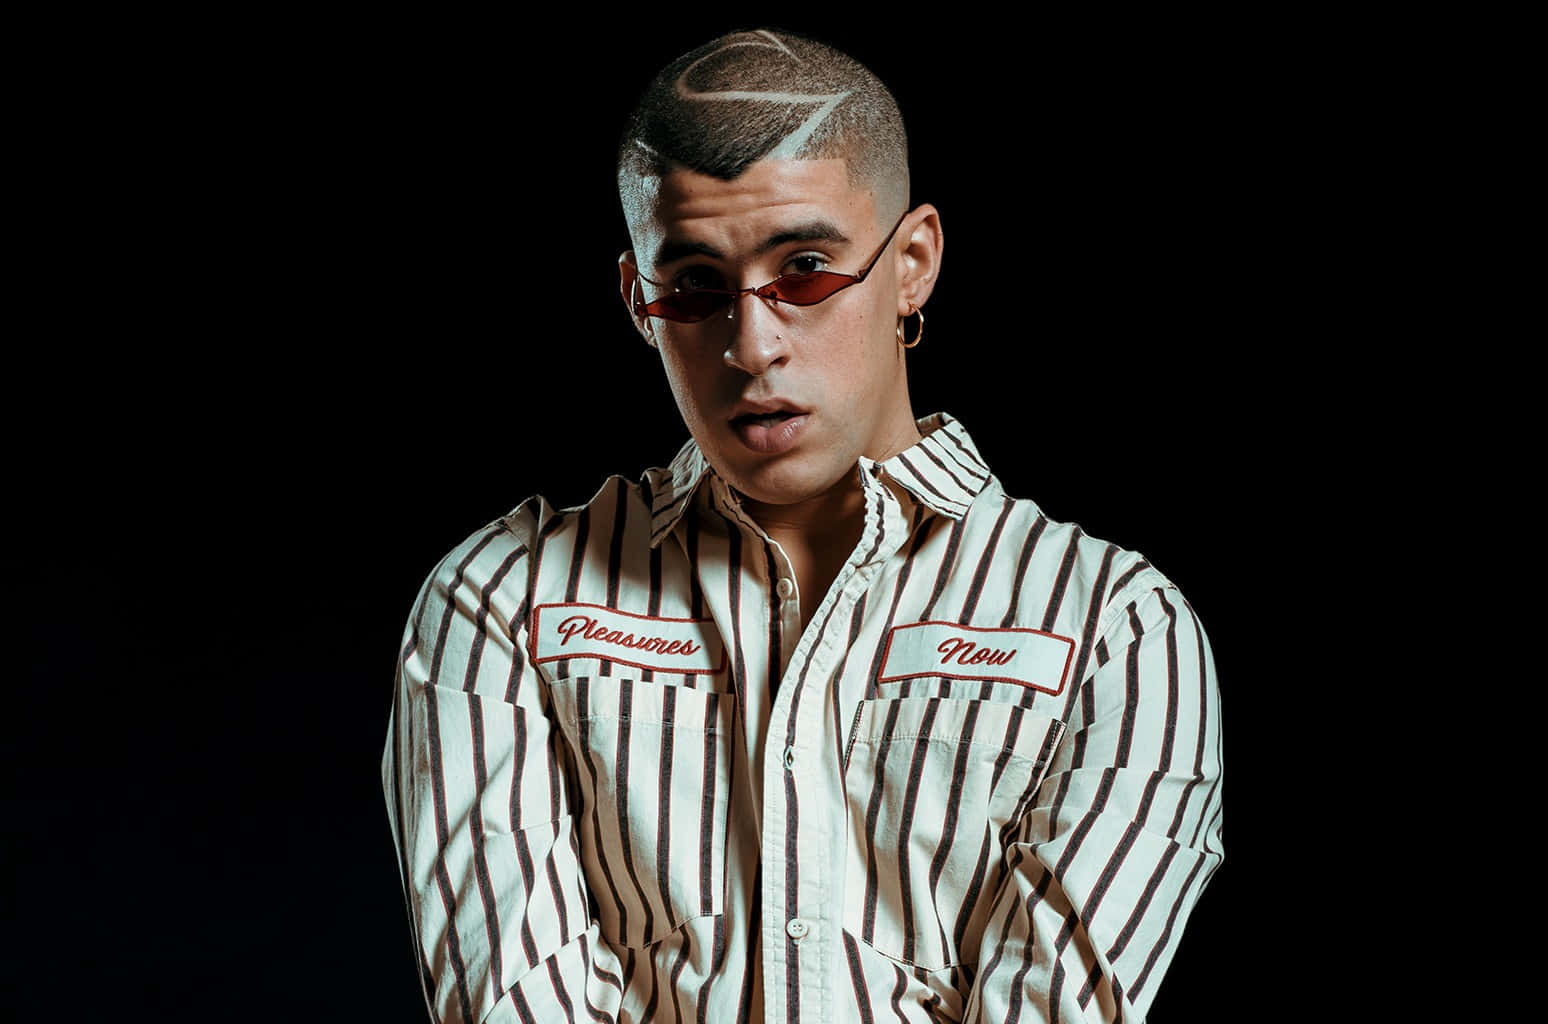 Singer/Songwriter Bad Bunny graces the cover of his new album.